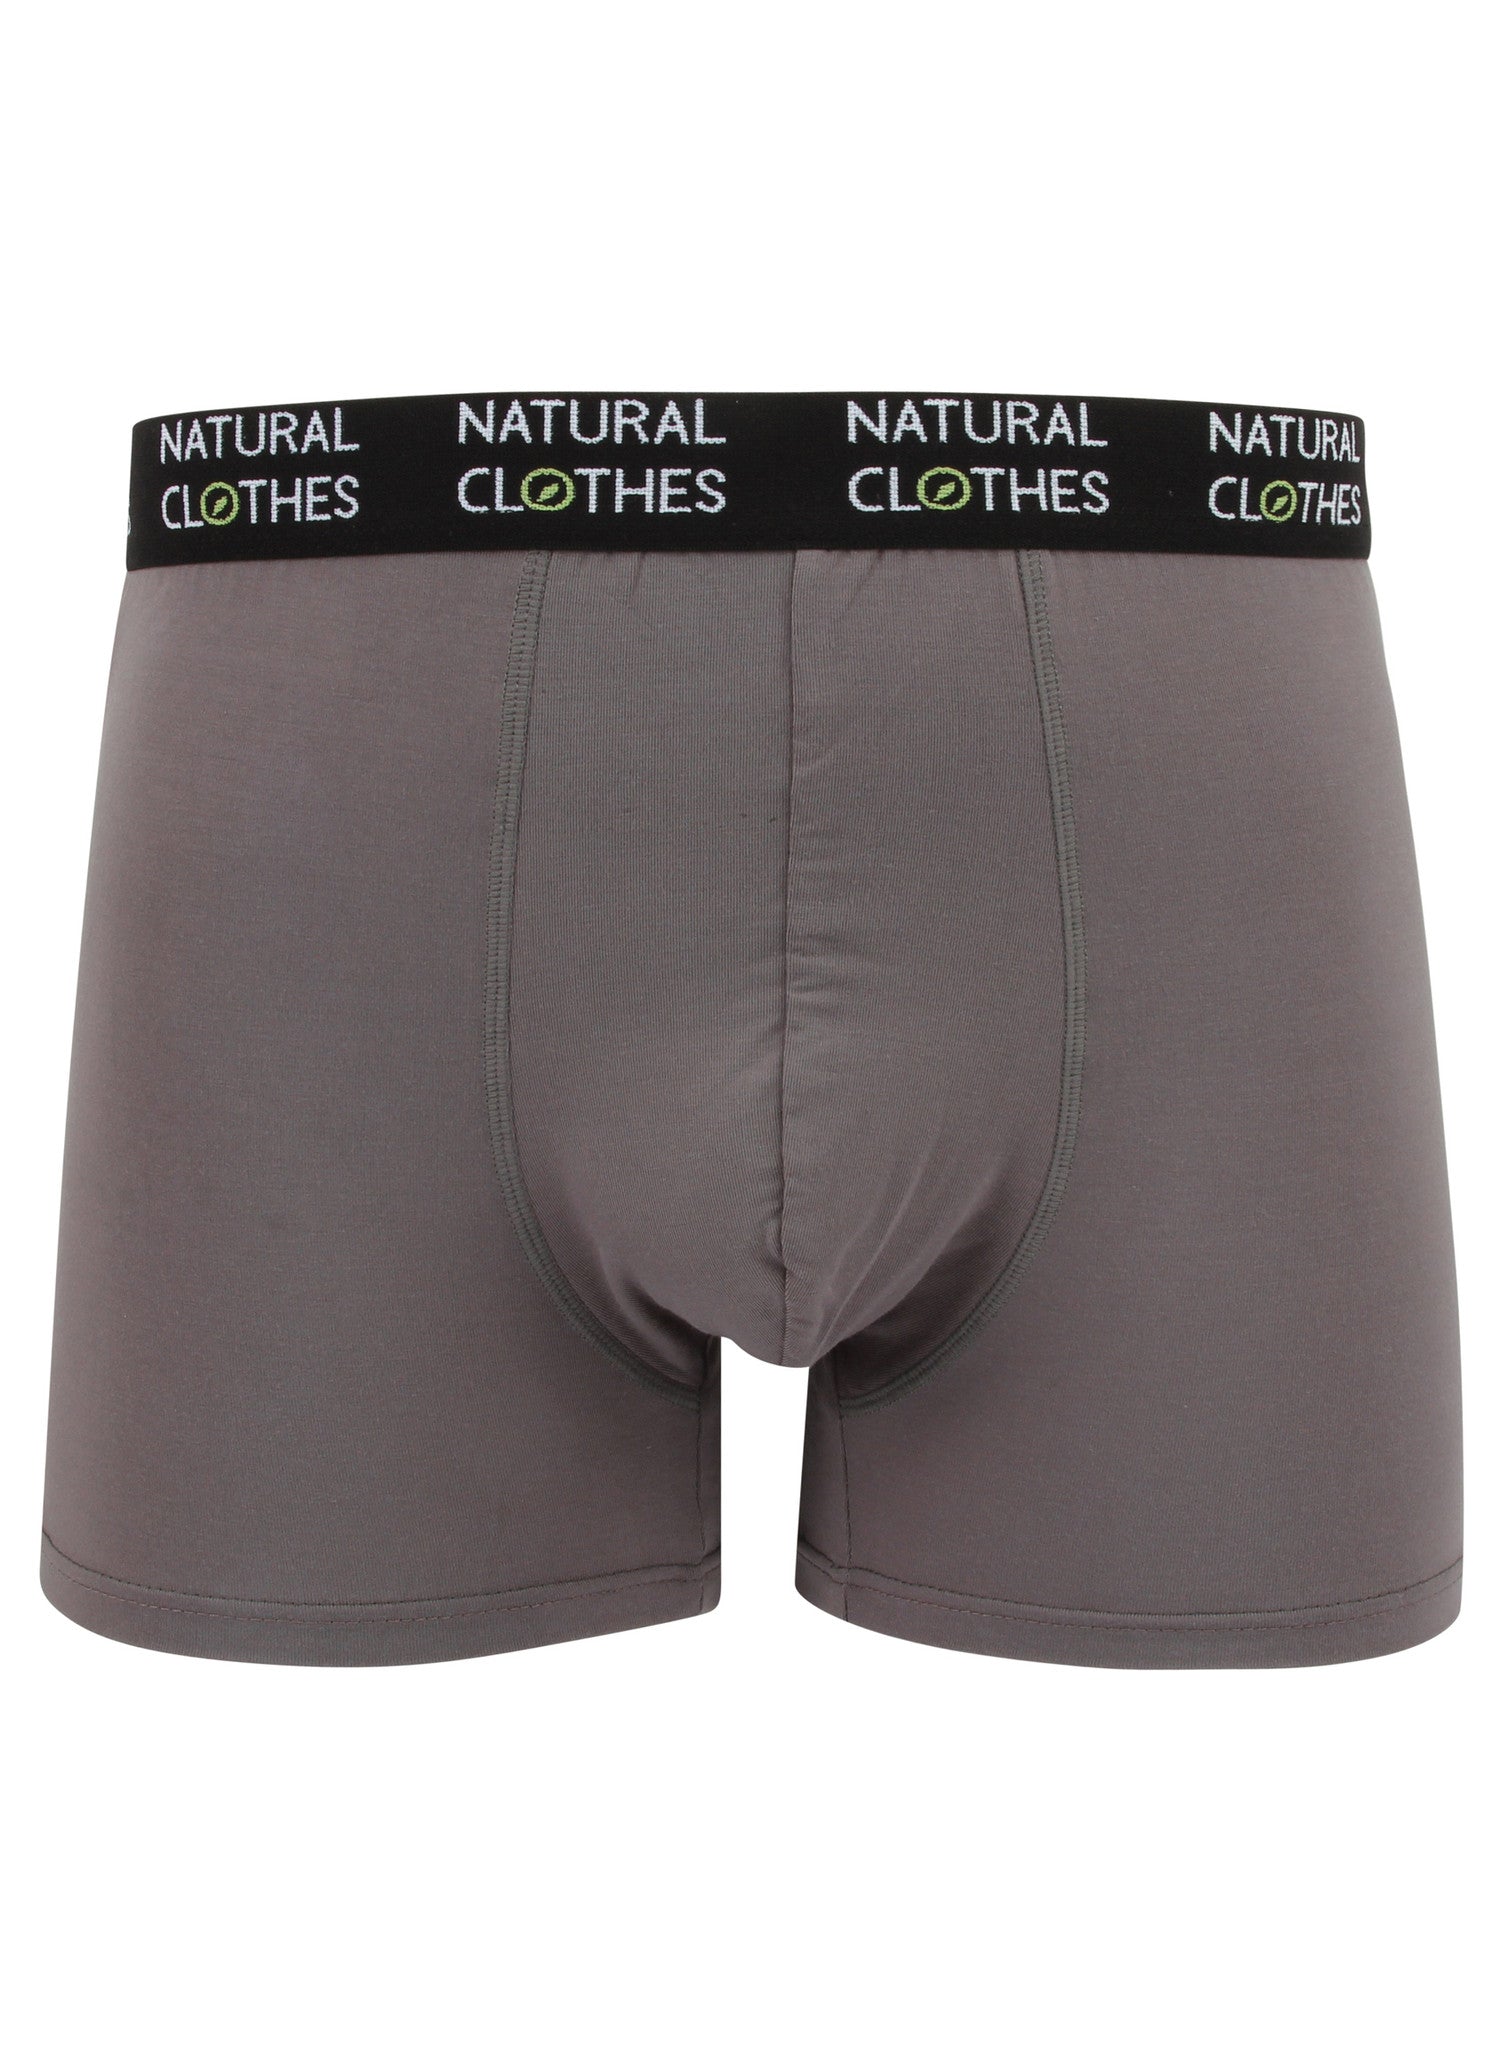 Bamboo Boxer Trunks Grey - Natural Clothes Bamboo Clothing & Accessories for Men & Women 